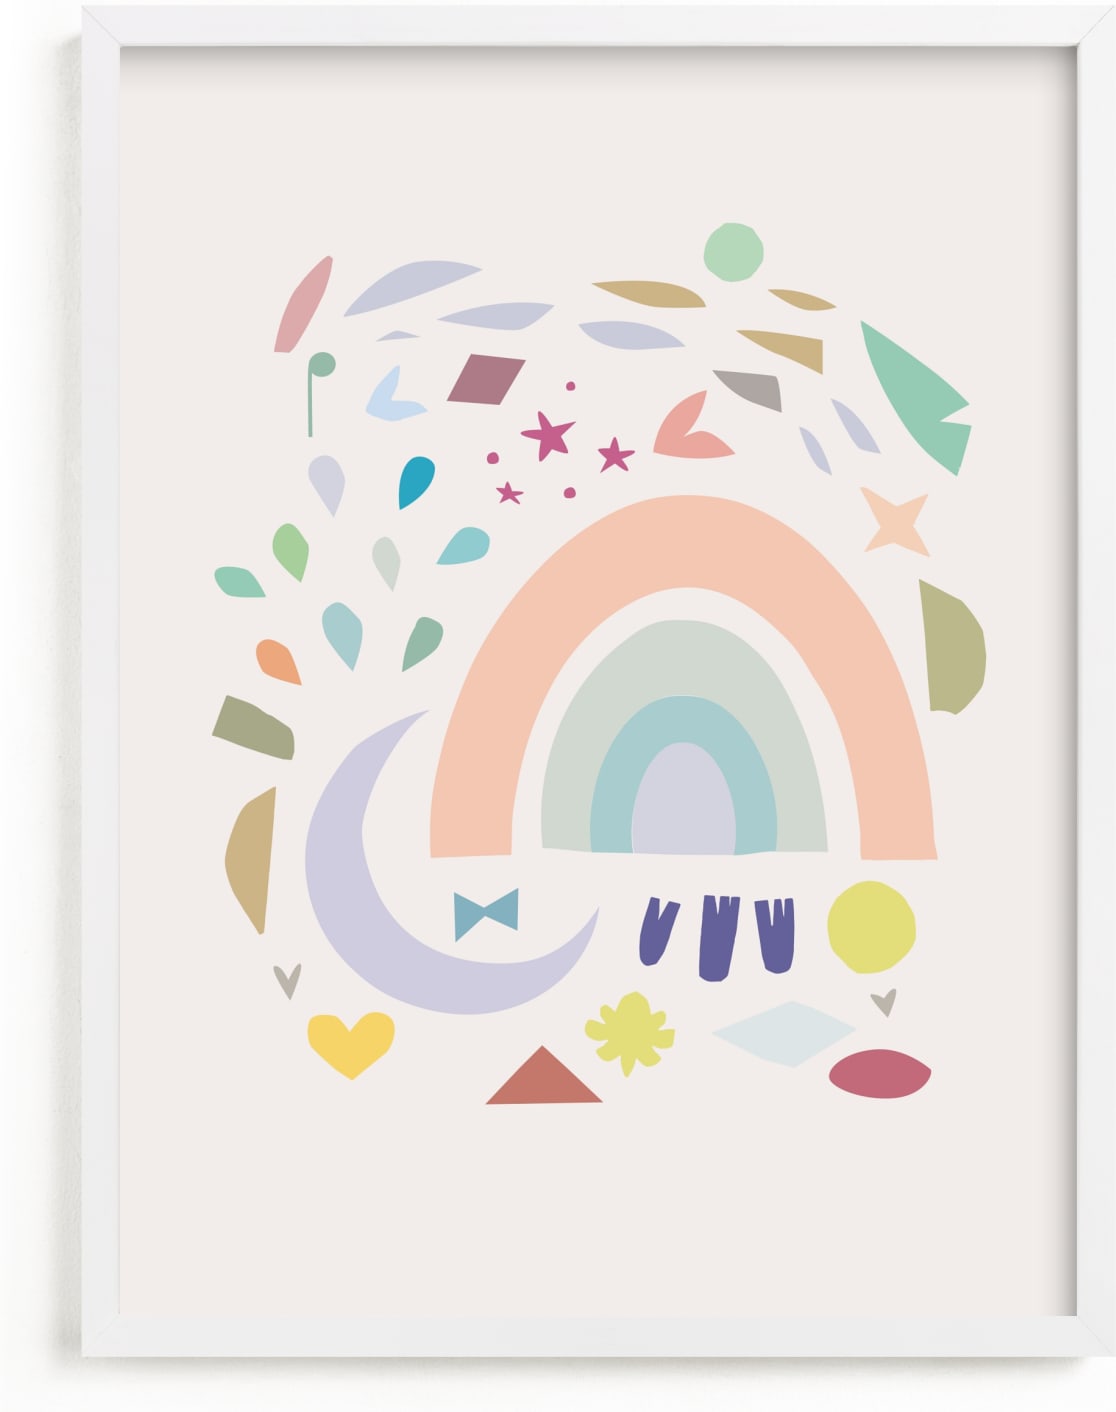 This is a colorful nursery wall art by Lori Wemple called Shapes.